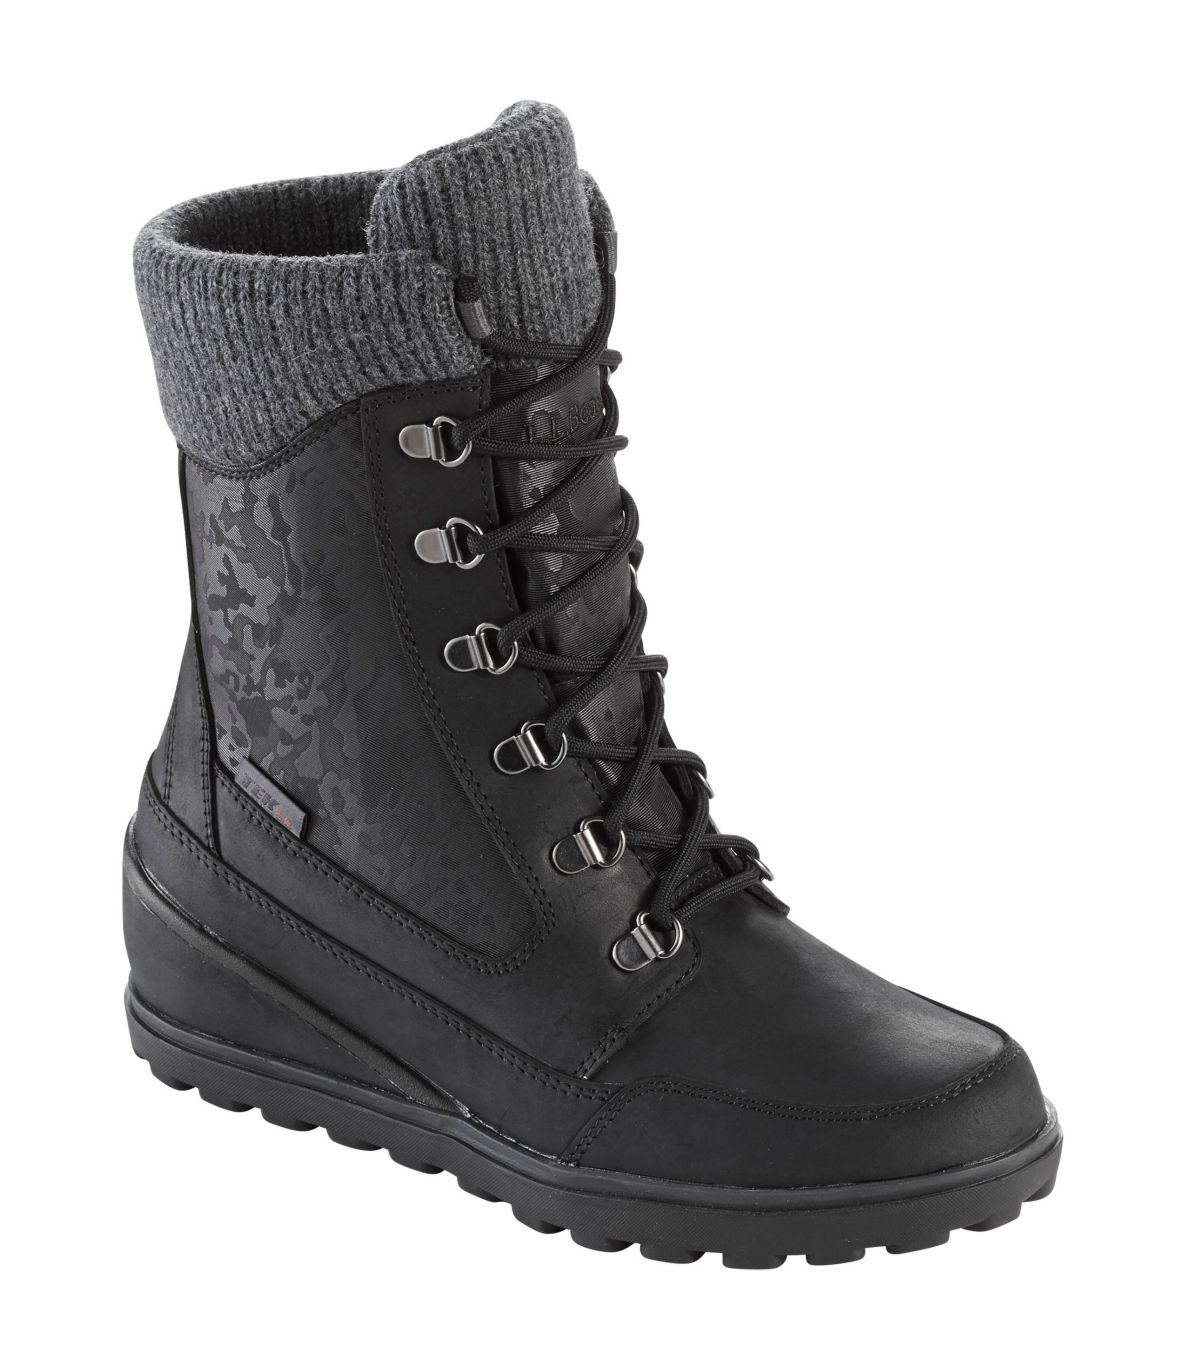 Women's Wedge Snow Boot, Leather/Mesh